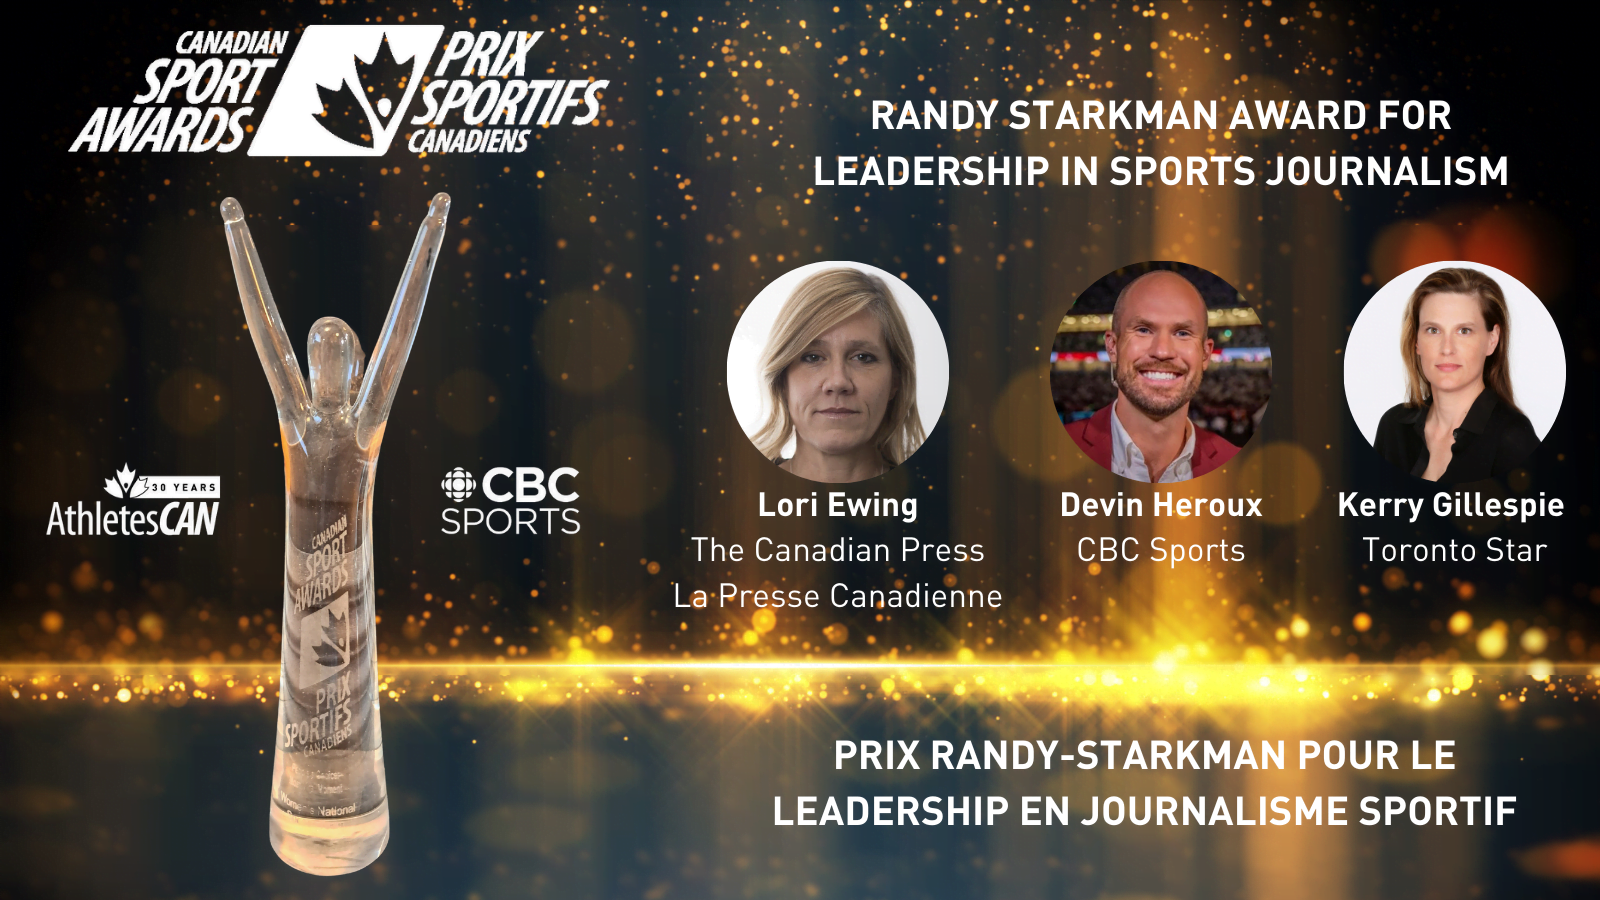 45th Canadian Sport Awards: Randy Starkman Award for Leadership in Sports Journalism Nominees